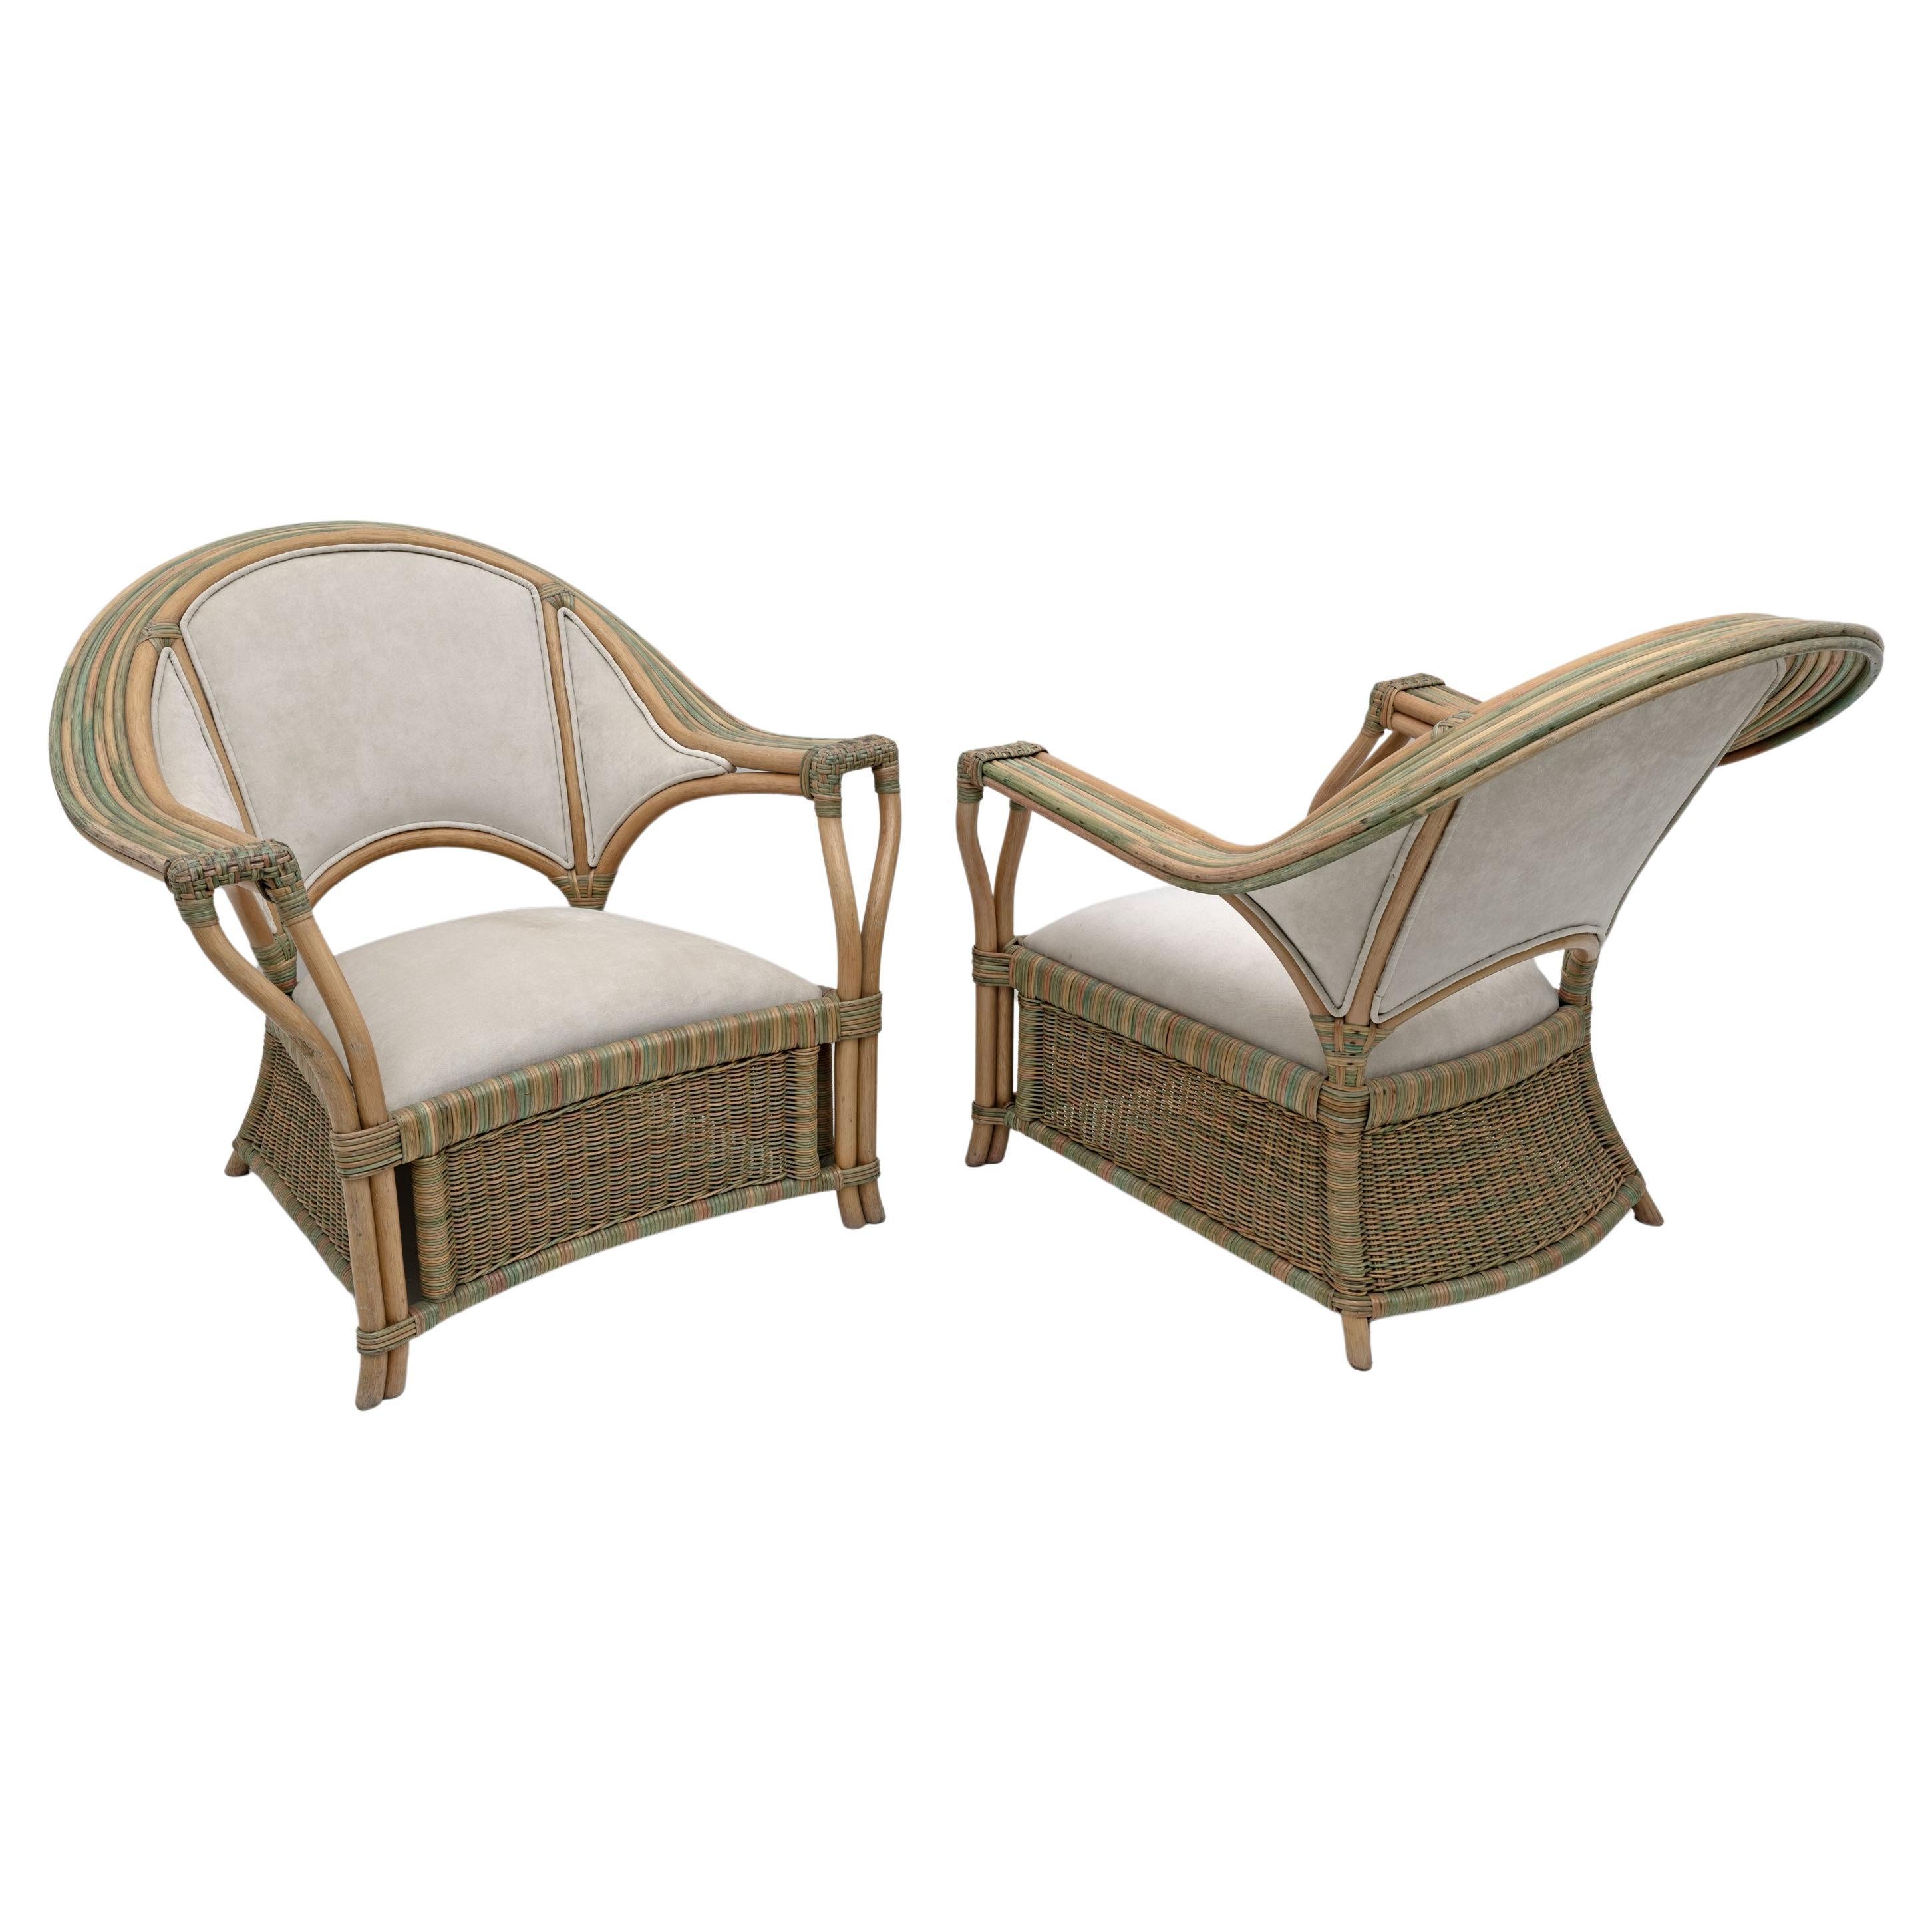 Pair of Mid-century Modern Italian Rattan and Wicker Armchairs, 1970s For Sale